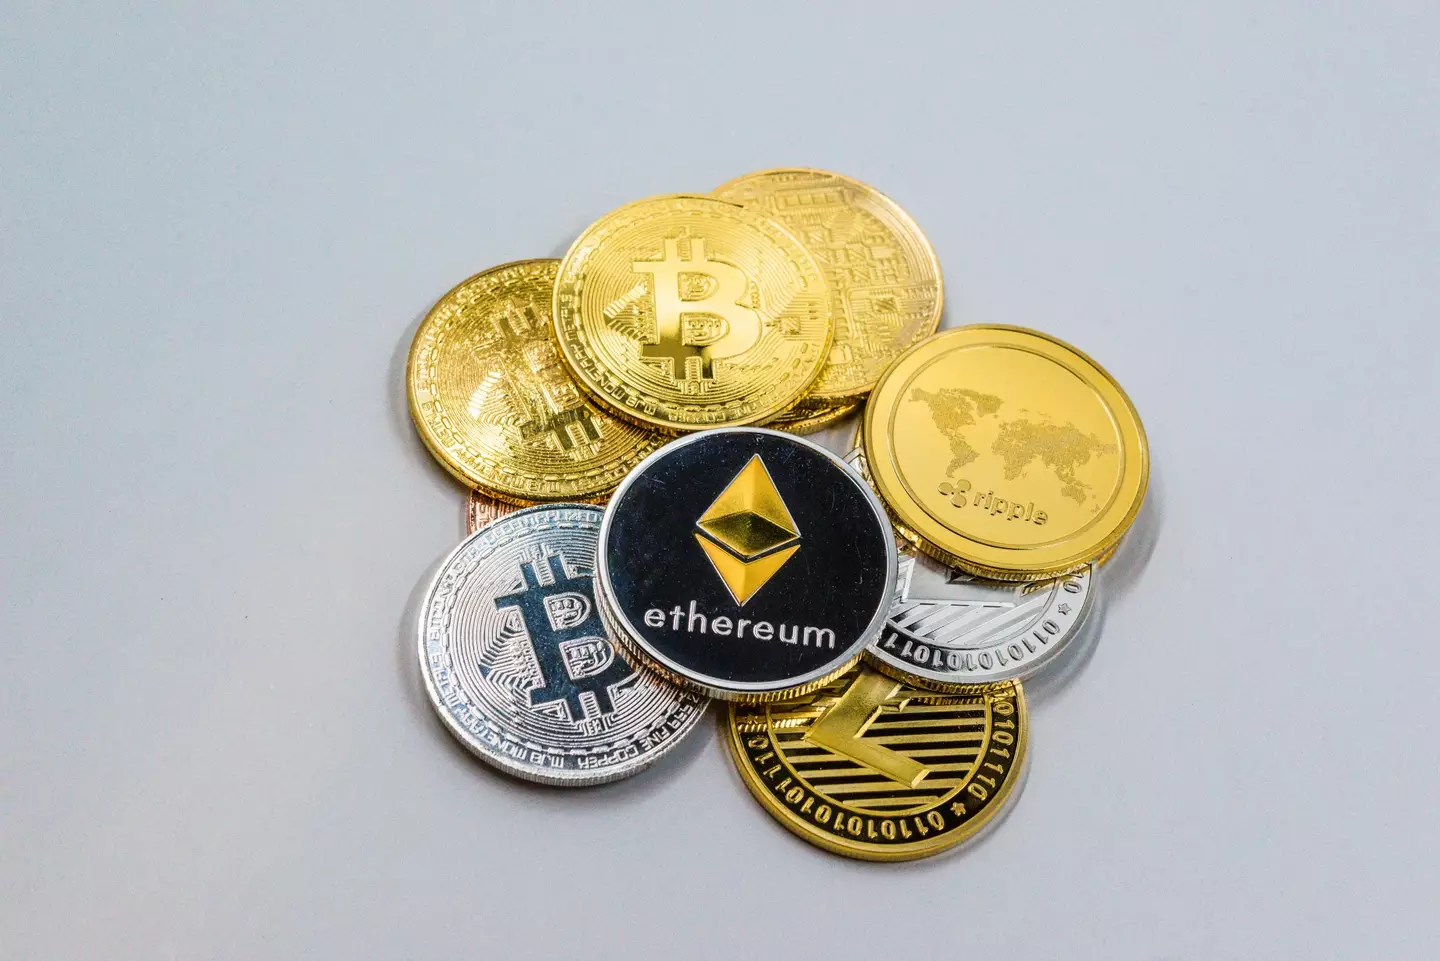 The theft amounted to over $620 million in Ethereum, a platform that hosts cryptocurrency.